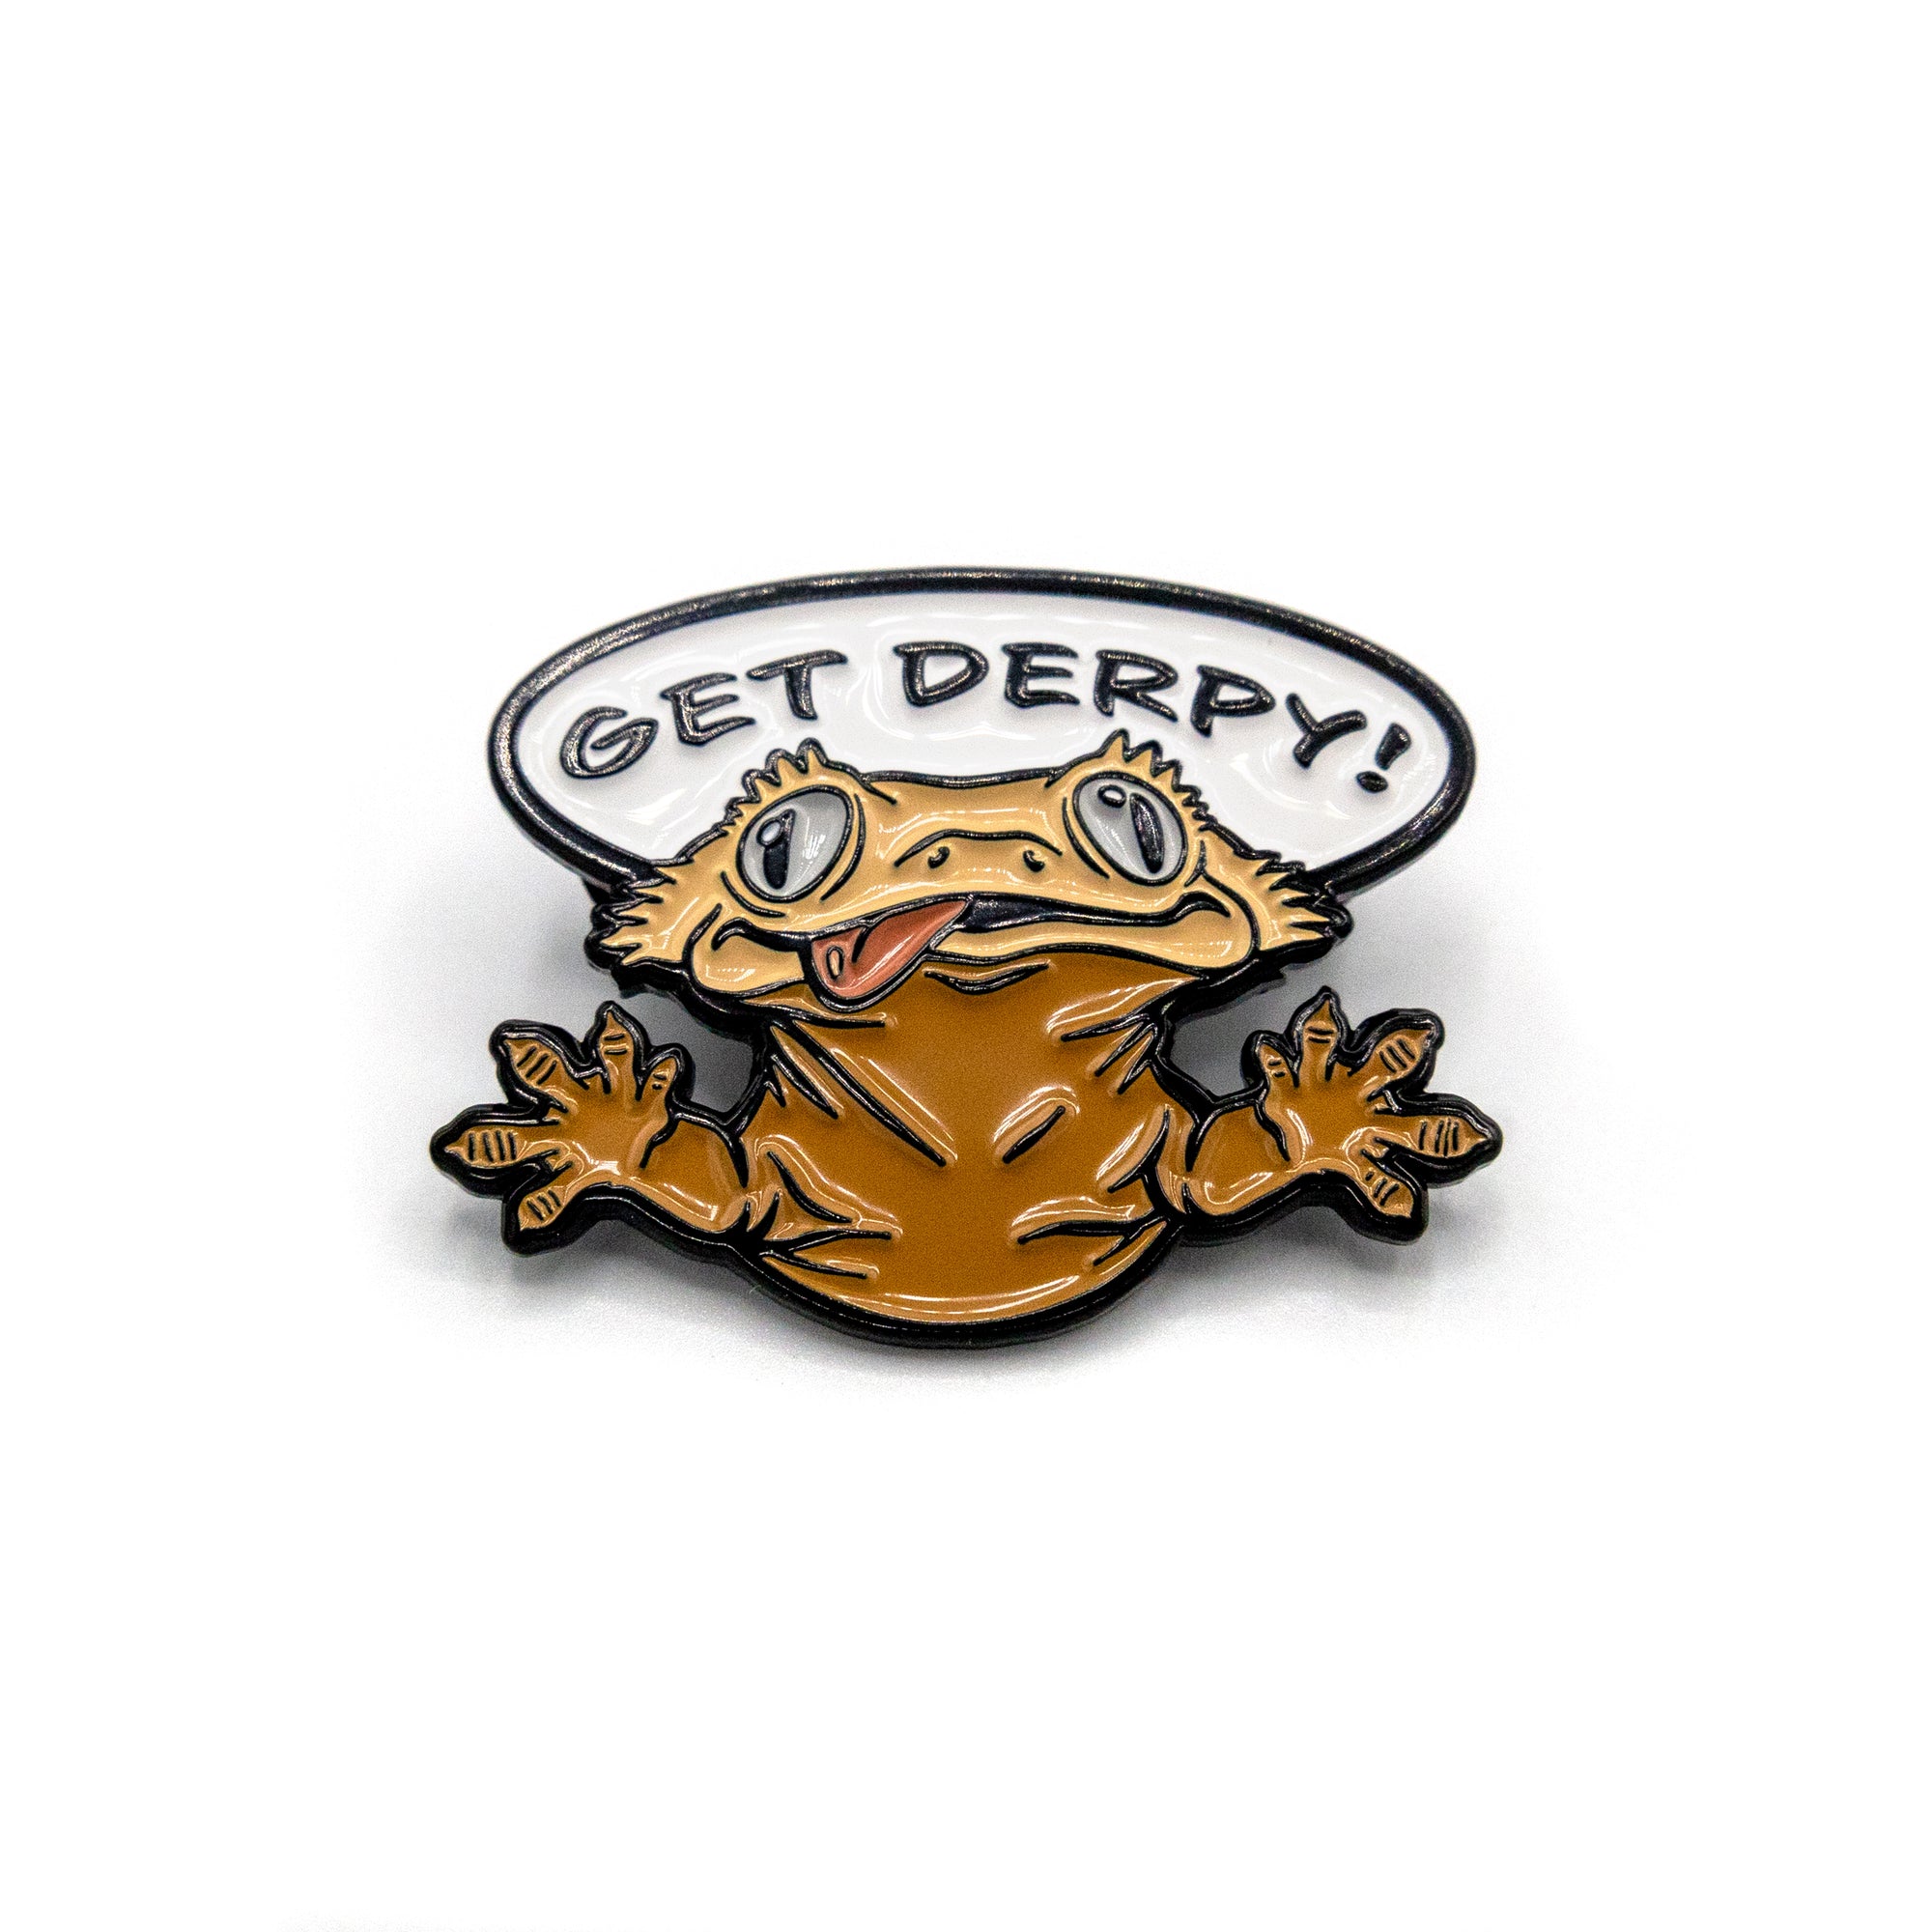 "Get Derpy" Crested Gecko Pin